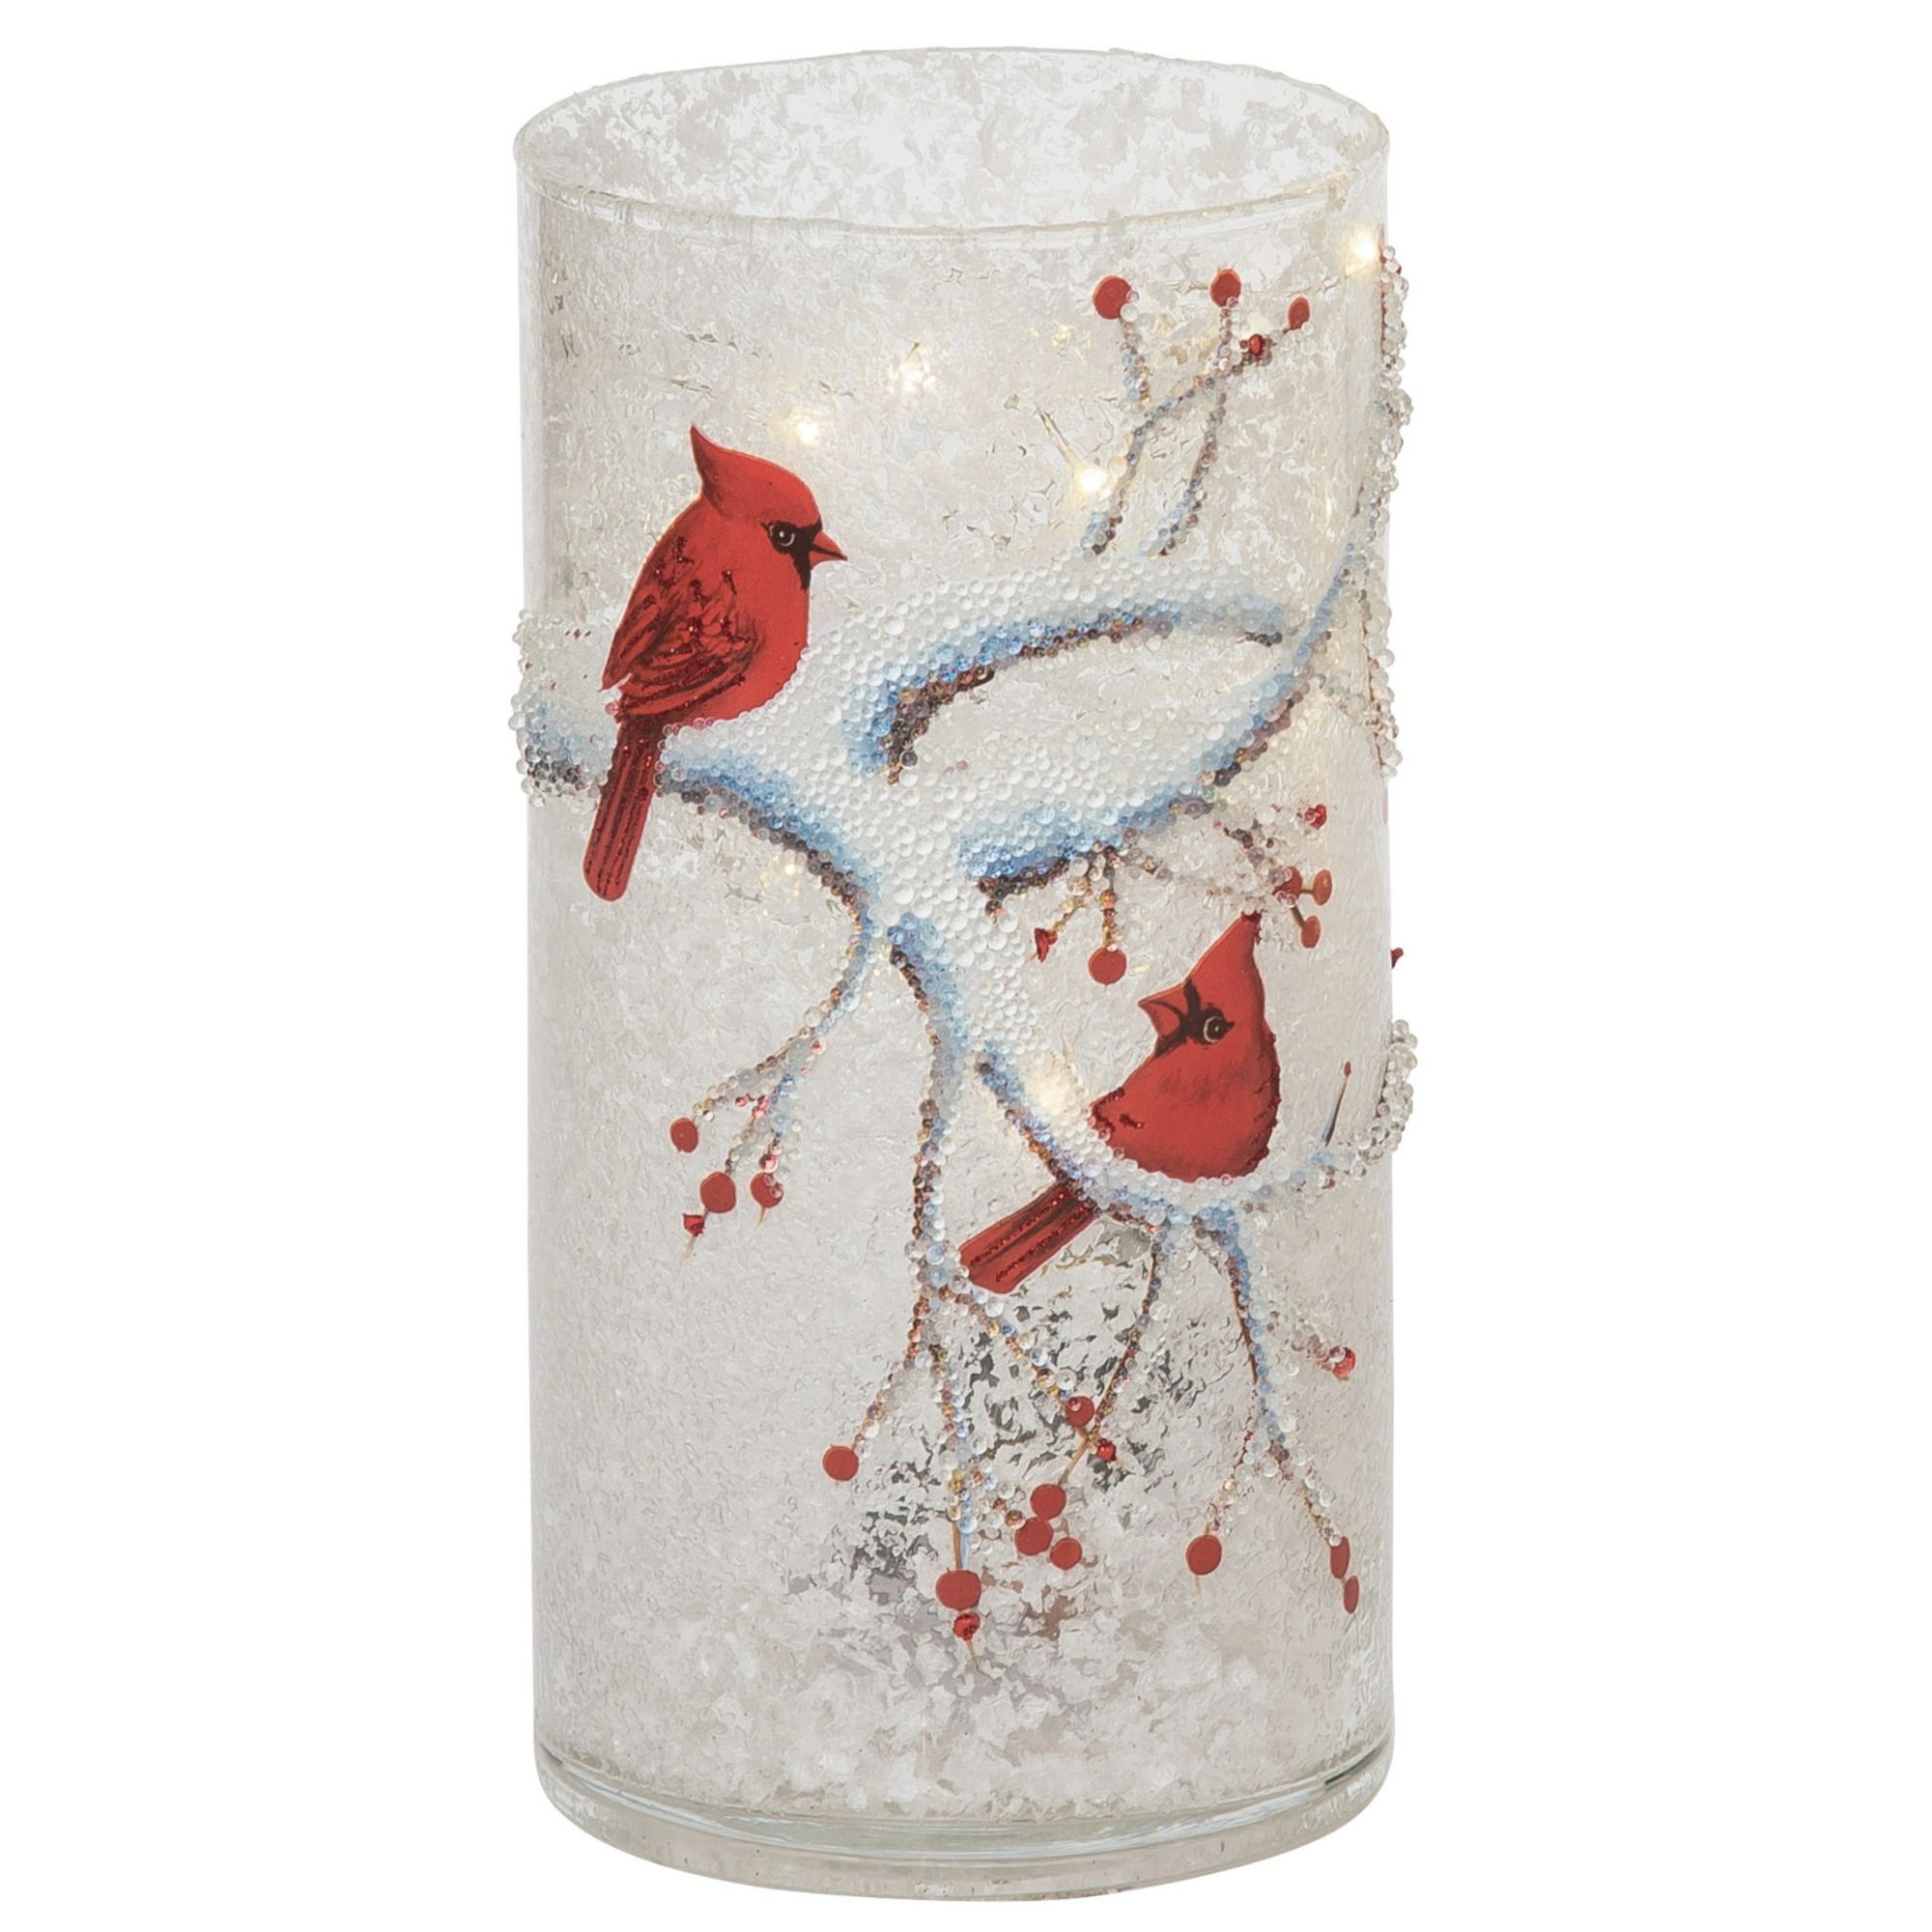 Contemporary Home Living 8" White and Red Cardinal Christmas Lighted Vase